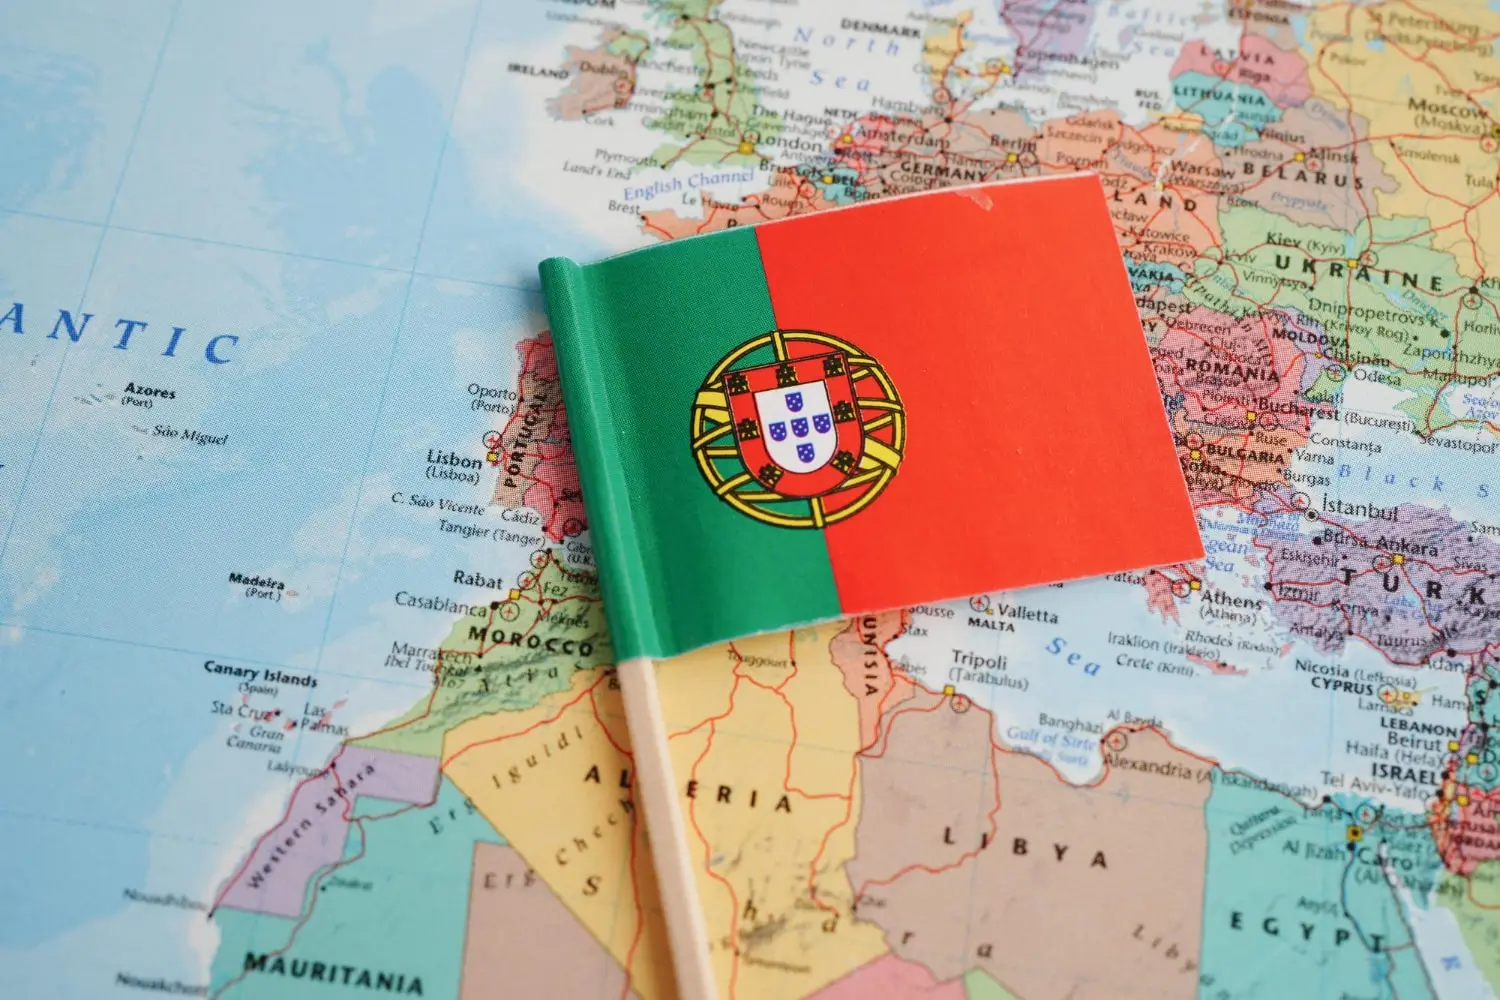 Portugal's flag on the Europe map